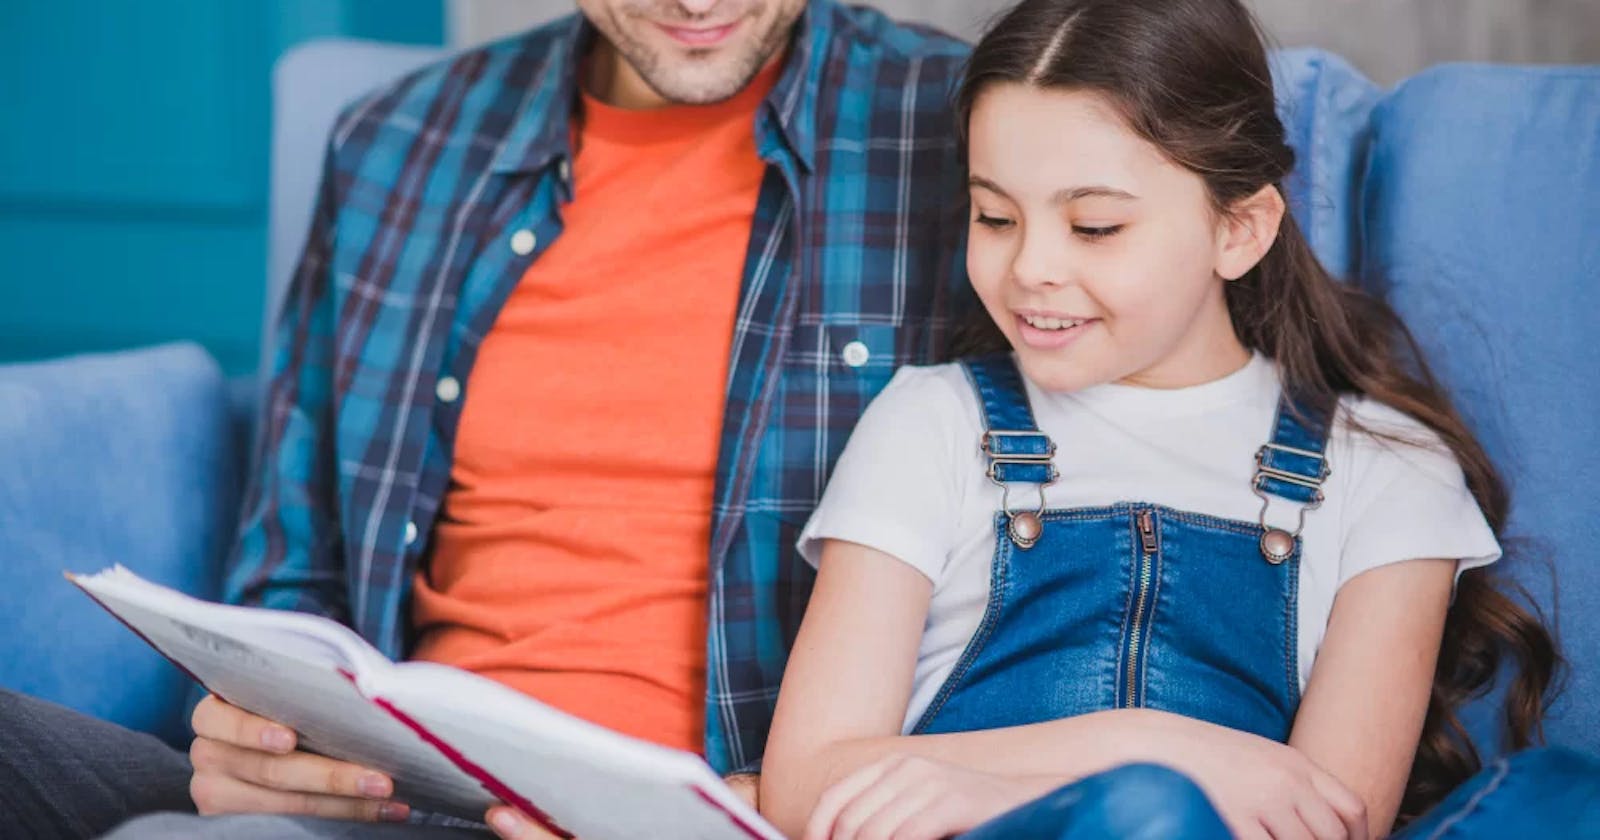 7 Tips for Parents Teaching Kids to Read in Spanish